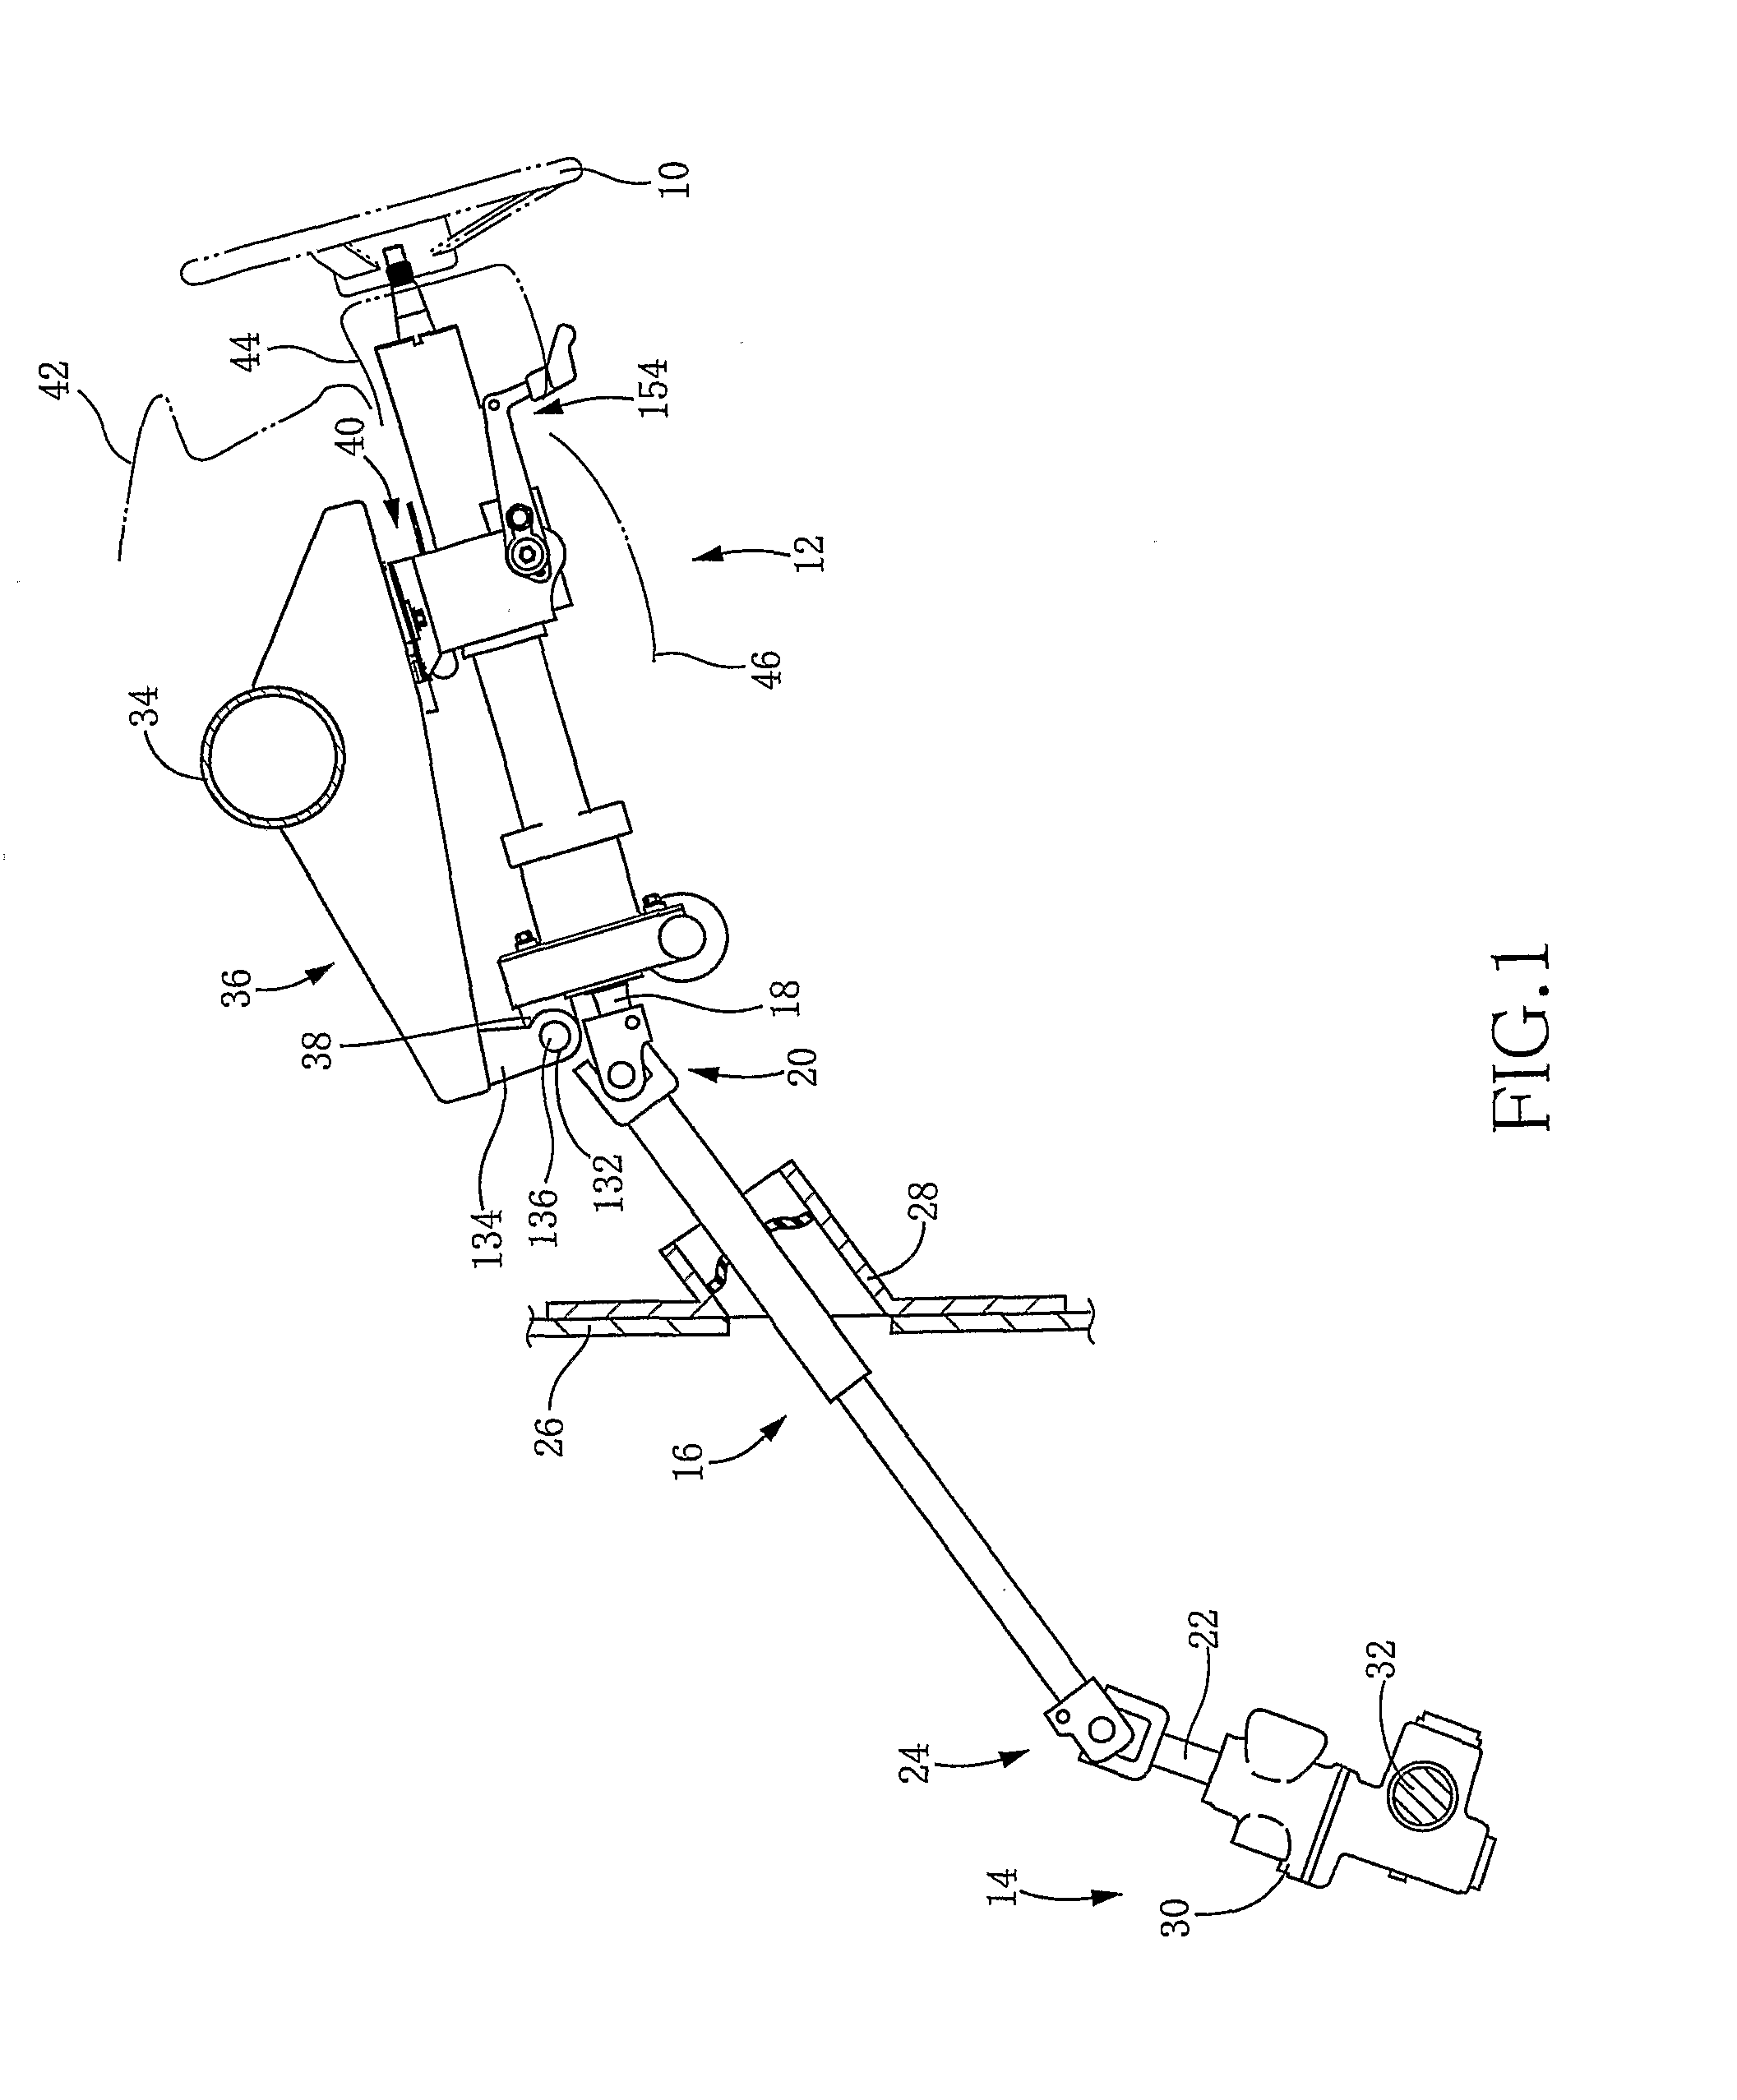 Steering-force transmitting apparatus for vehicle